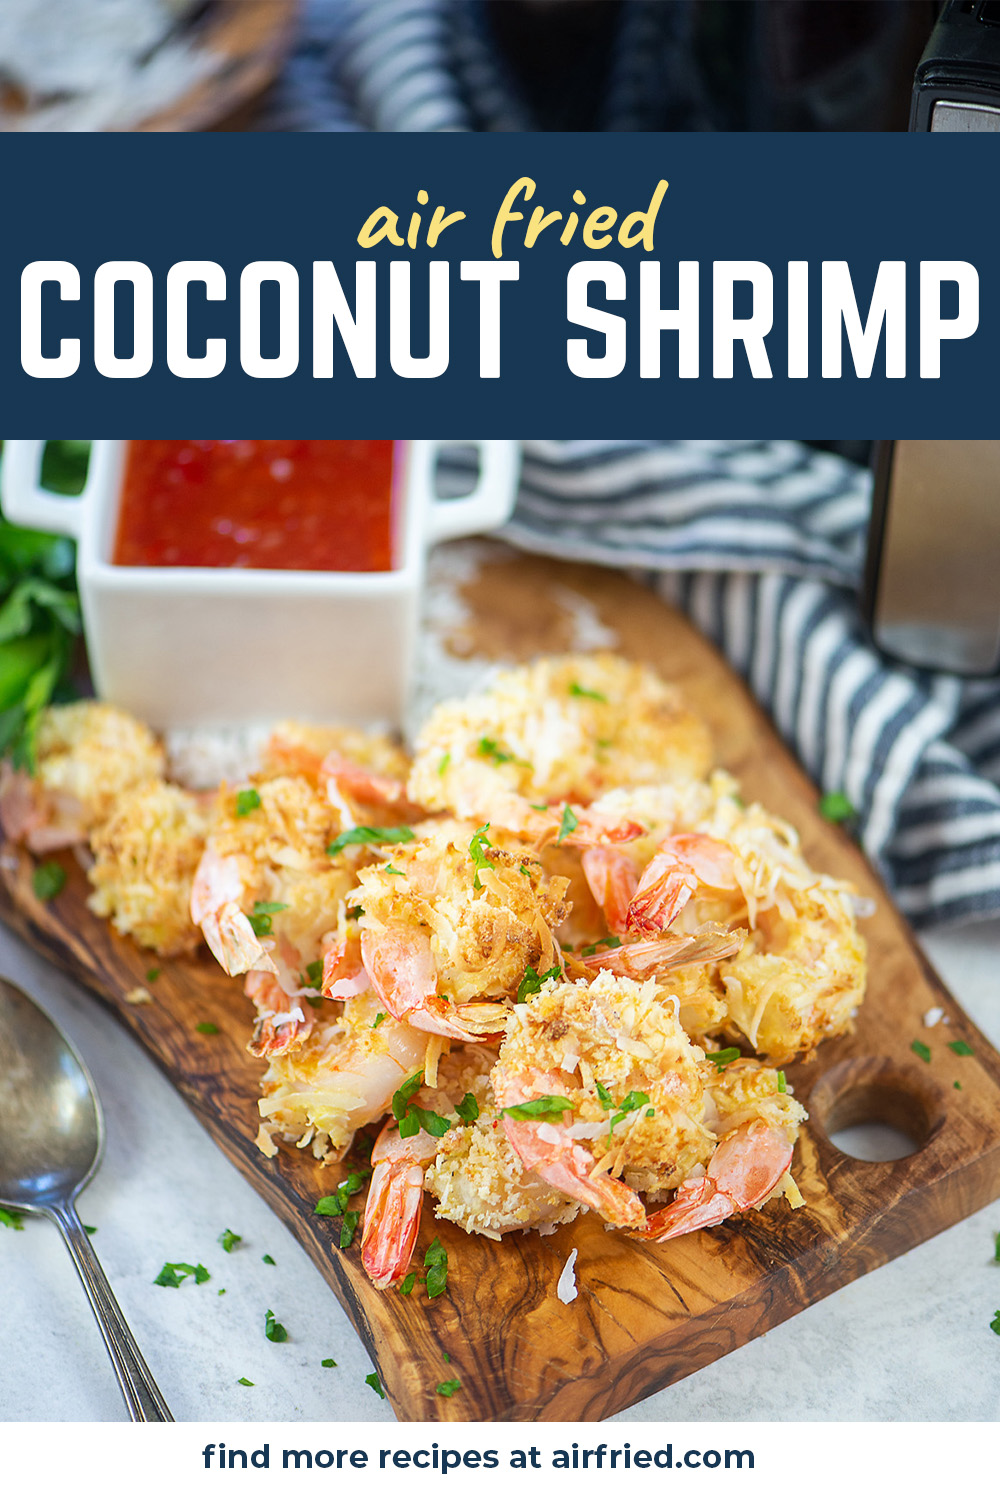 This easy coconut shrimp recipe comes out of your air fryer crispy and ready to eat!